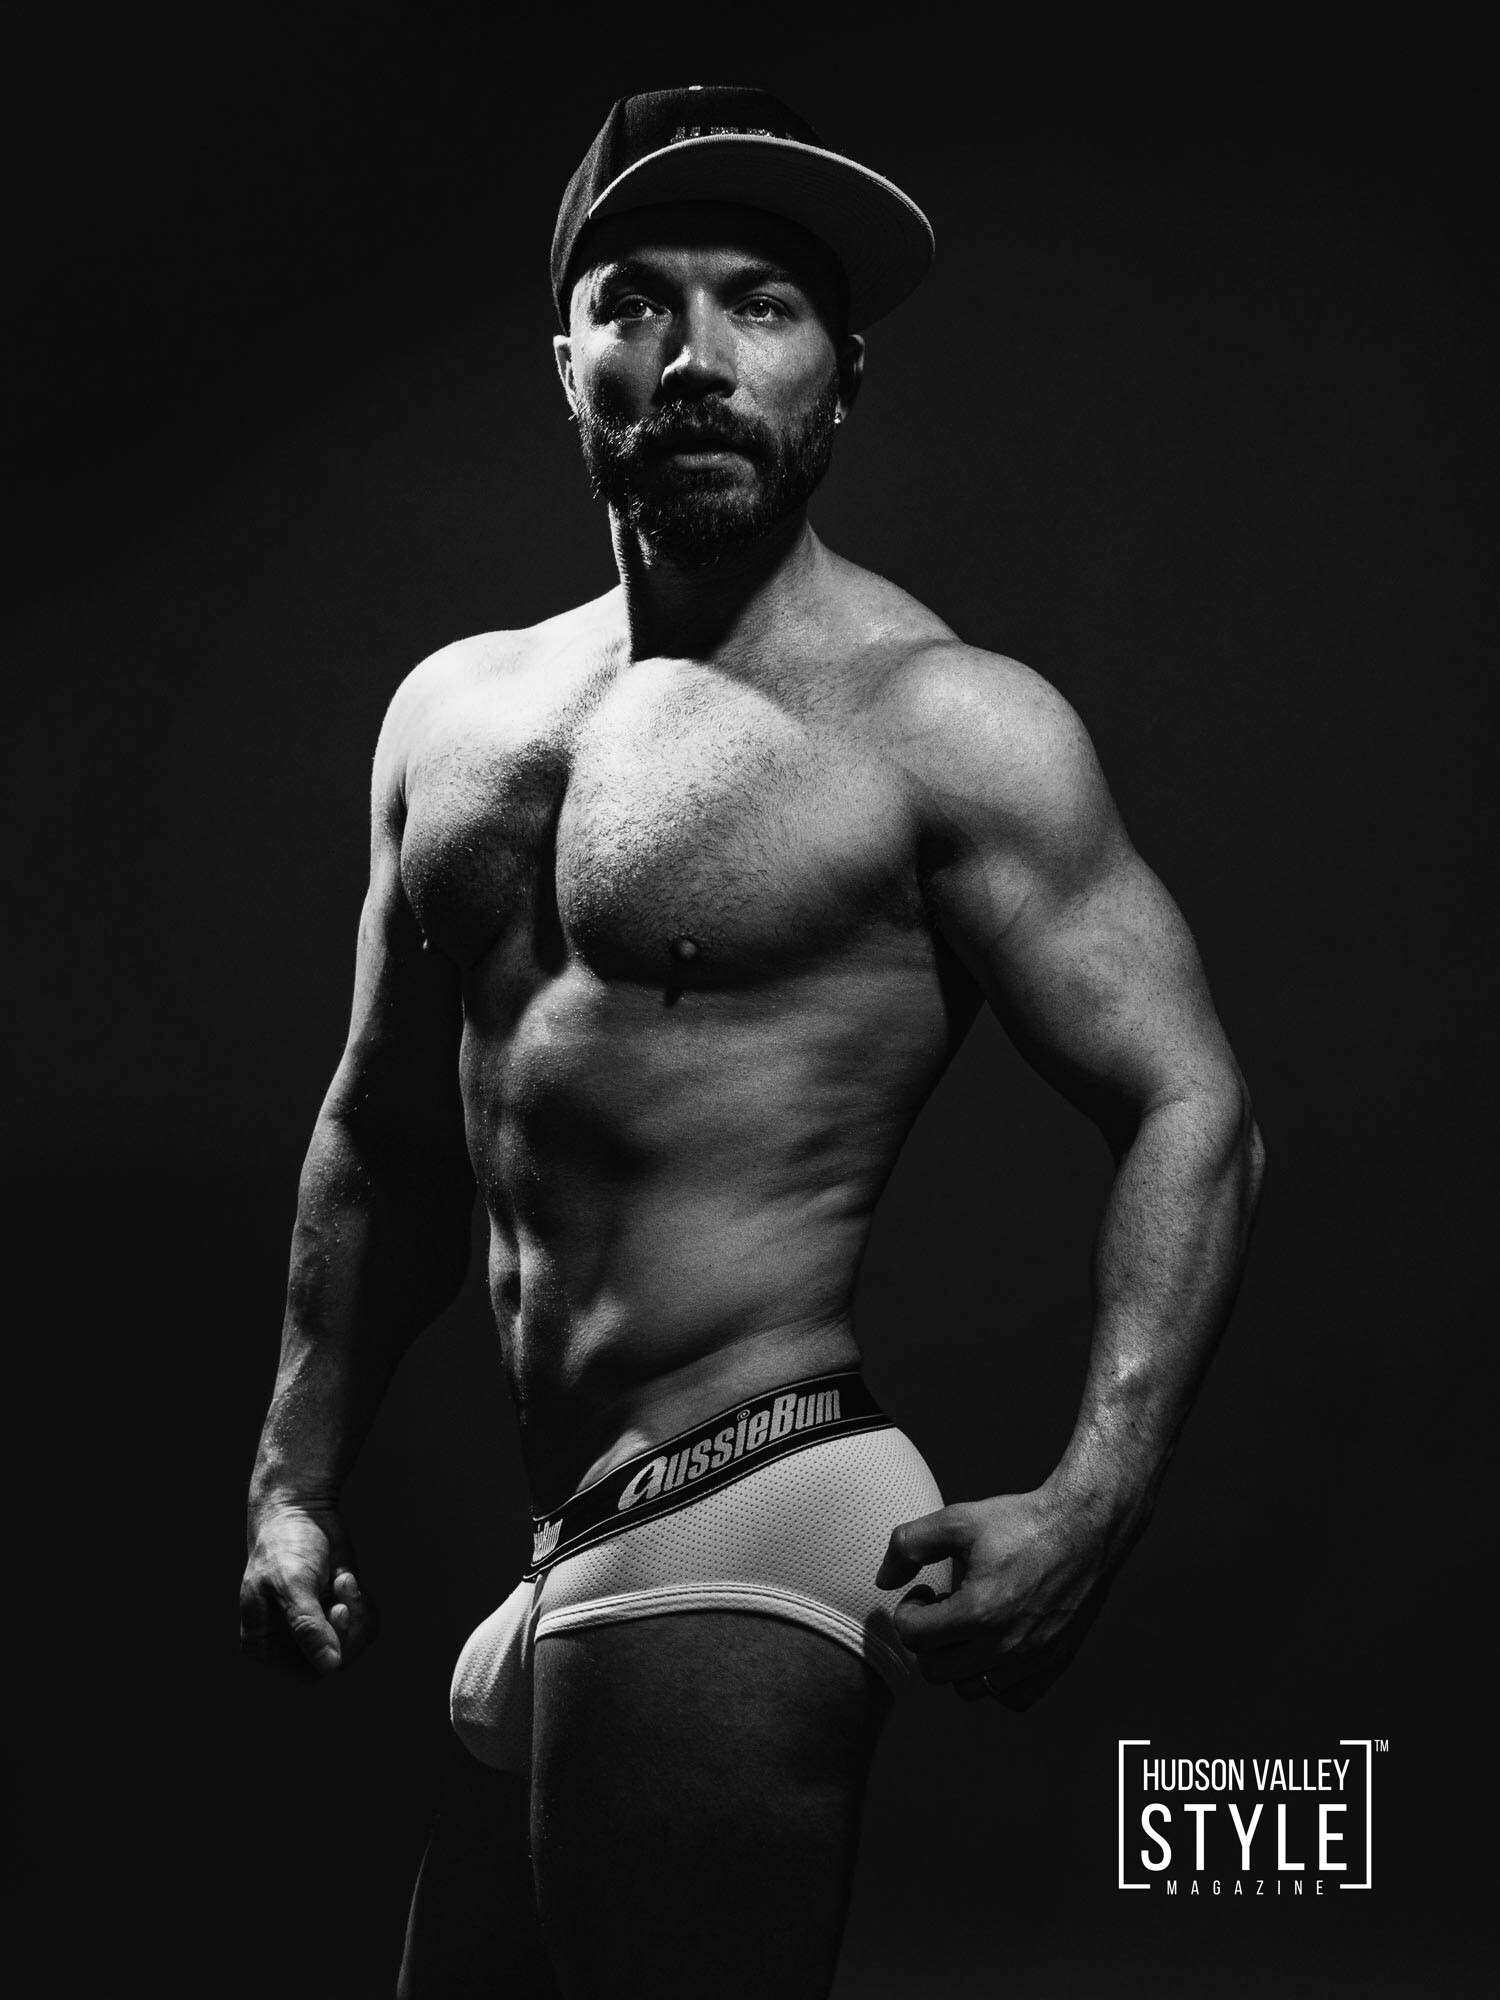 Fine Art Fitness and Bodybuilding Photography by Photographer Maxwell Alexander – Best Gay OnlyFans Fitness Coach – Best Photographer on OnlyFans – Check out Private (18+) OnlyFans Gallery at OnlyFans.com/maxwellalexander.photo for even more Bodybuilding Motivation Fine Art Photography Work